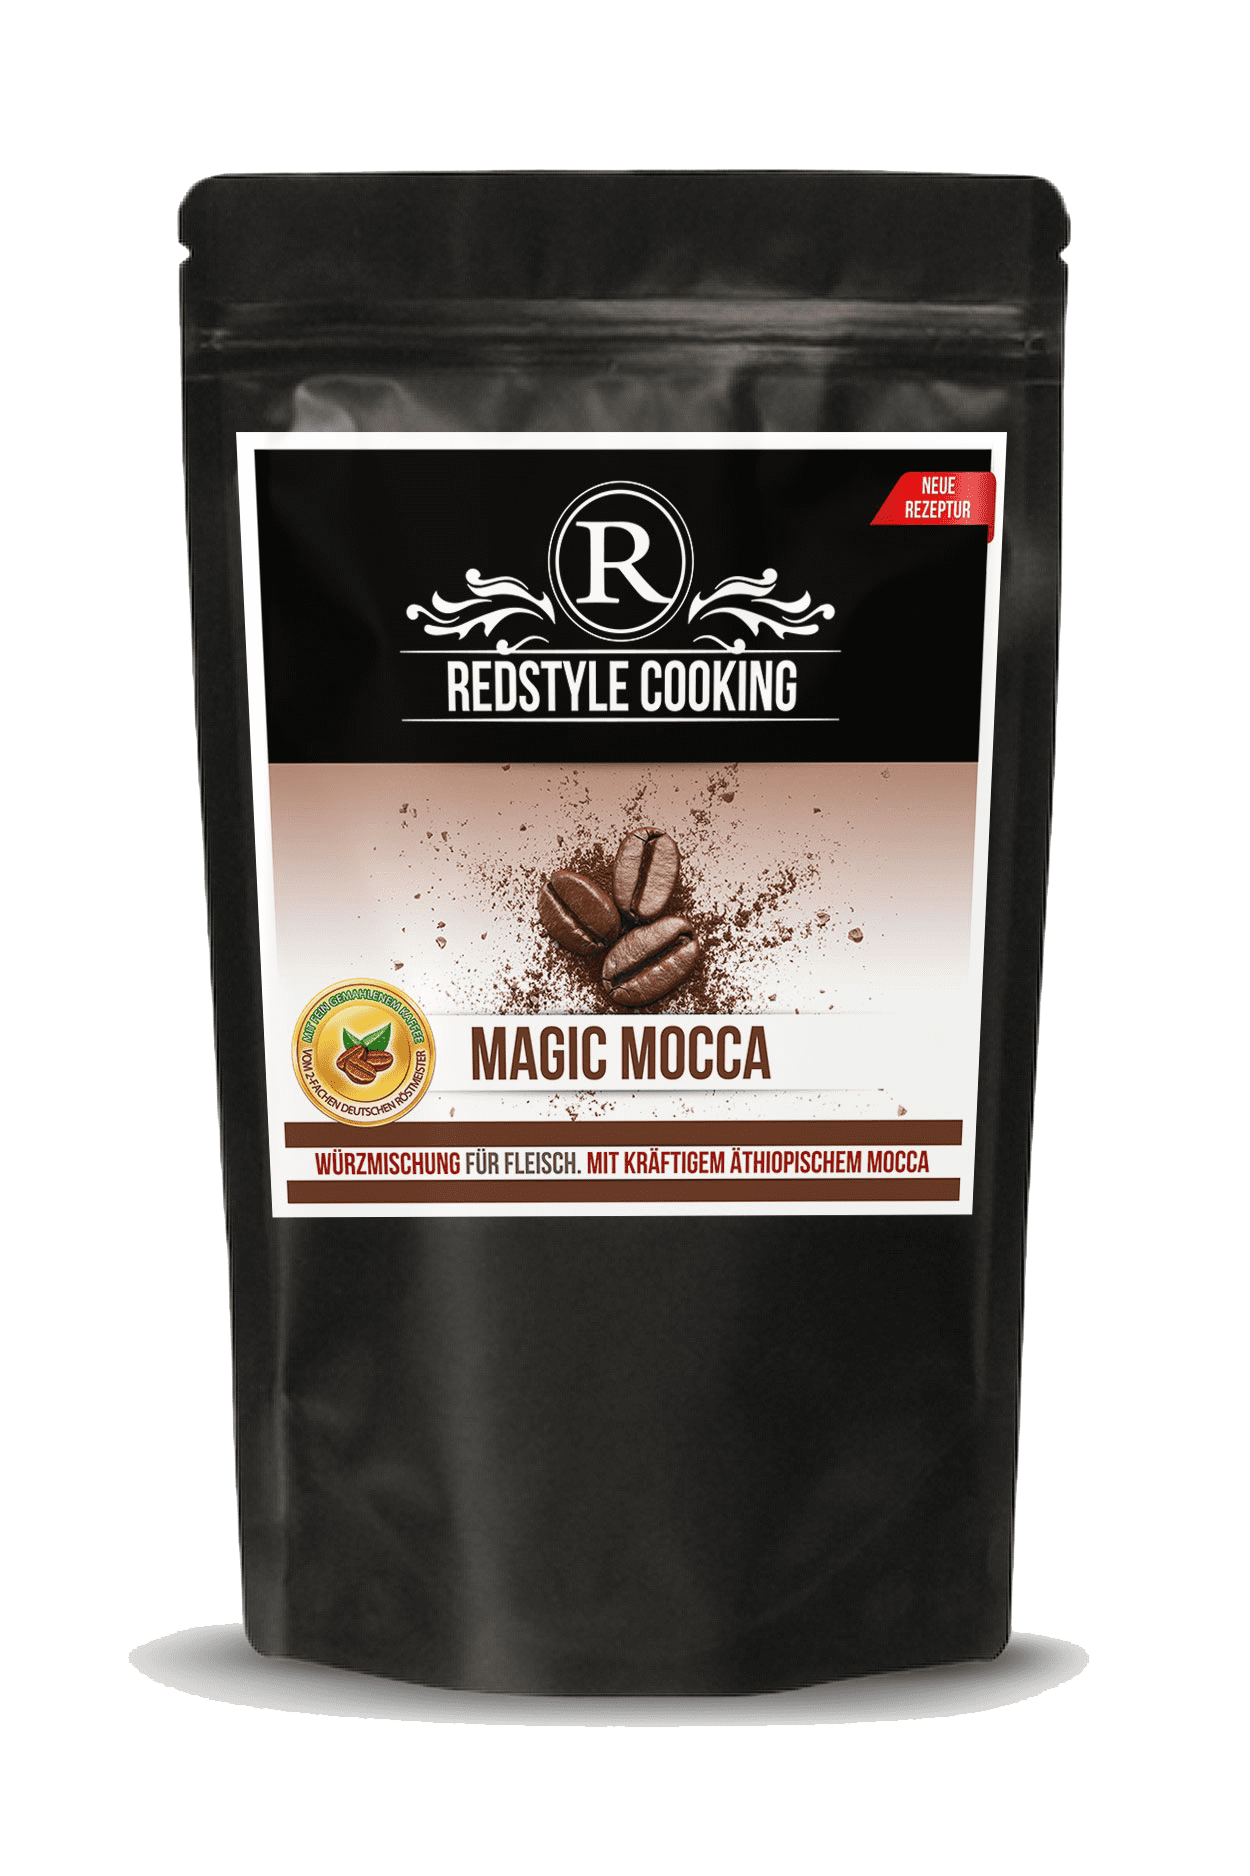 Magic Mocca, Redstyle Cooking